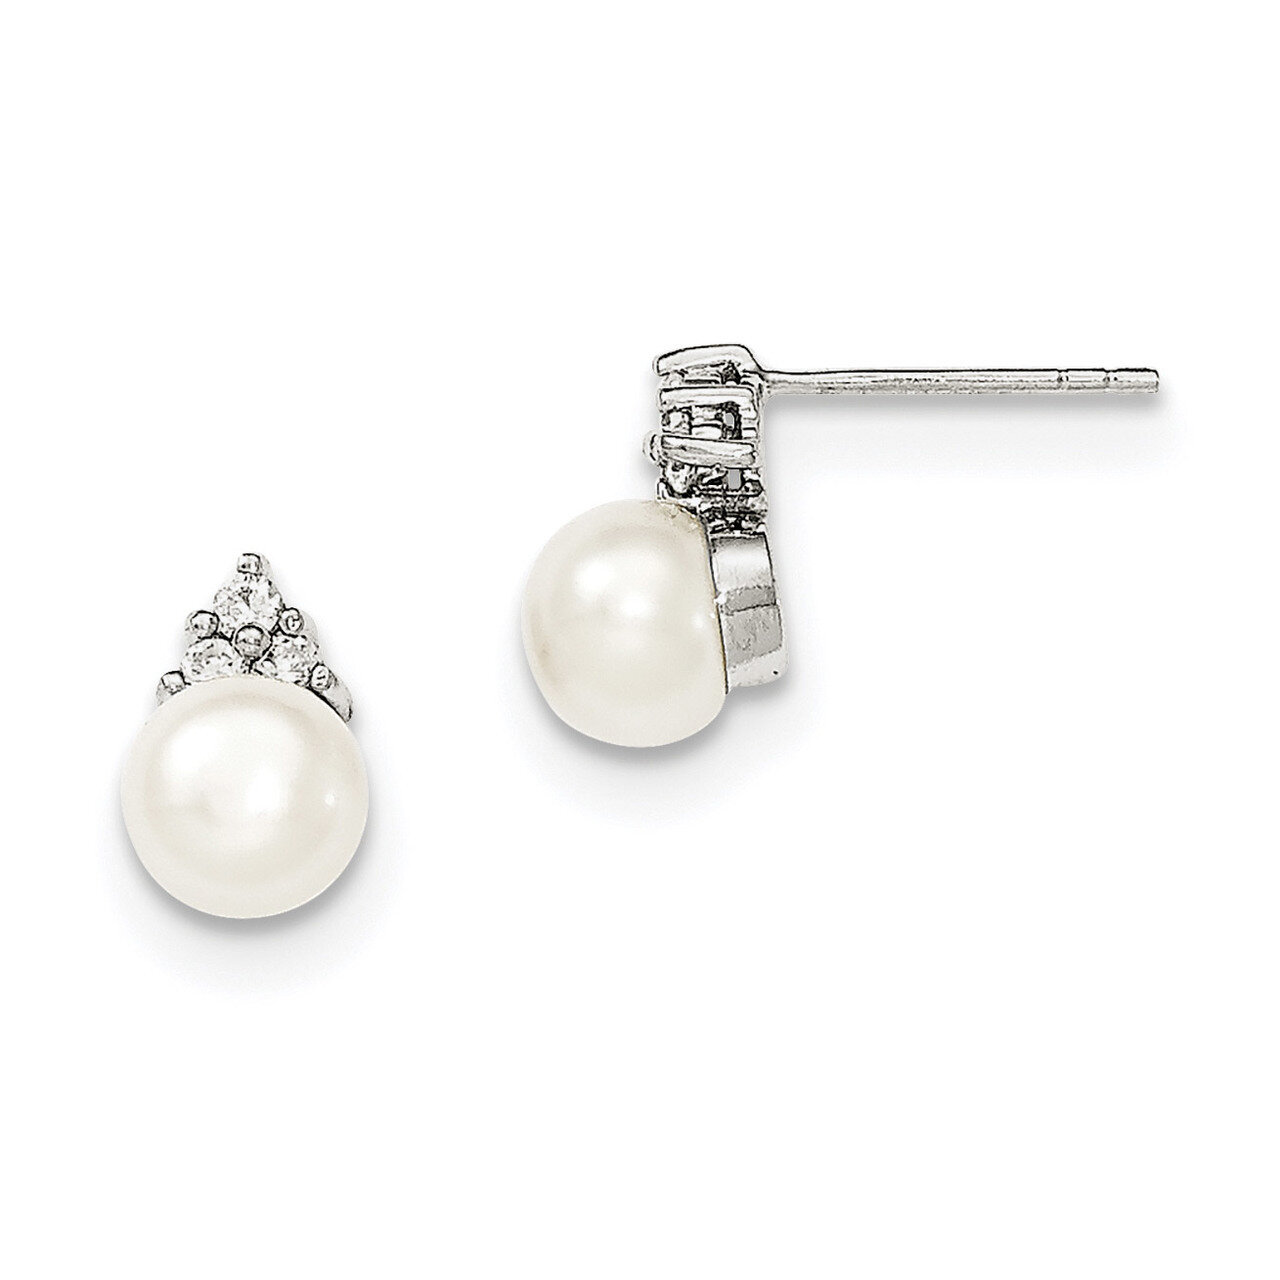 6-7mm White Cultured Freshwater Pearl CZ Diamond Post Earrings Sterling Silver Rhodium-plated QE12812